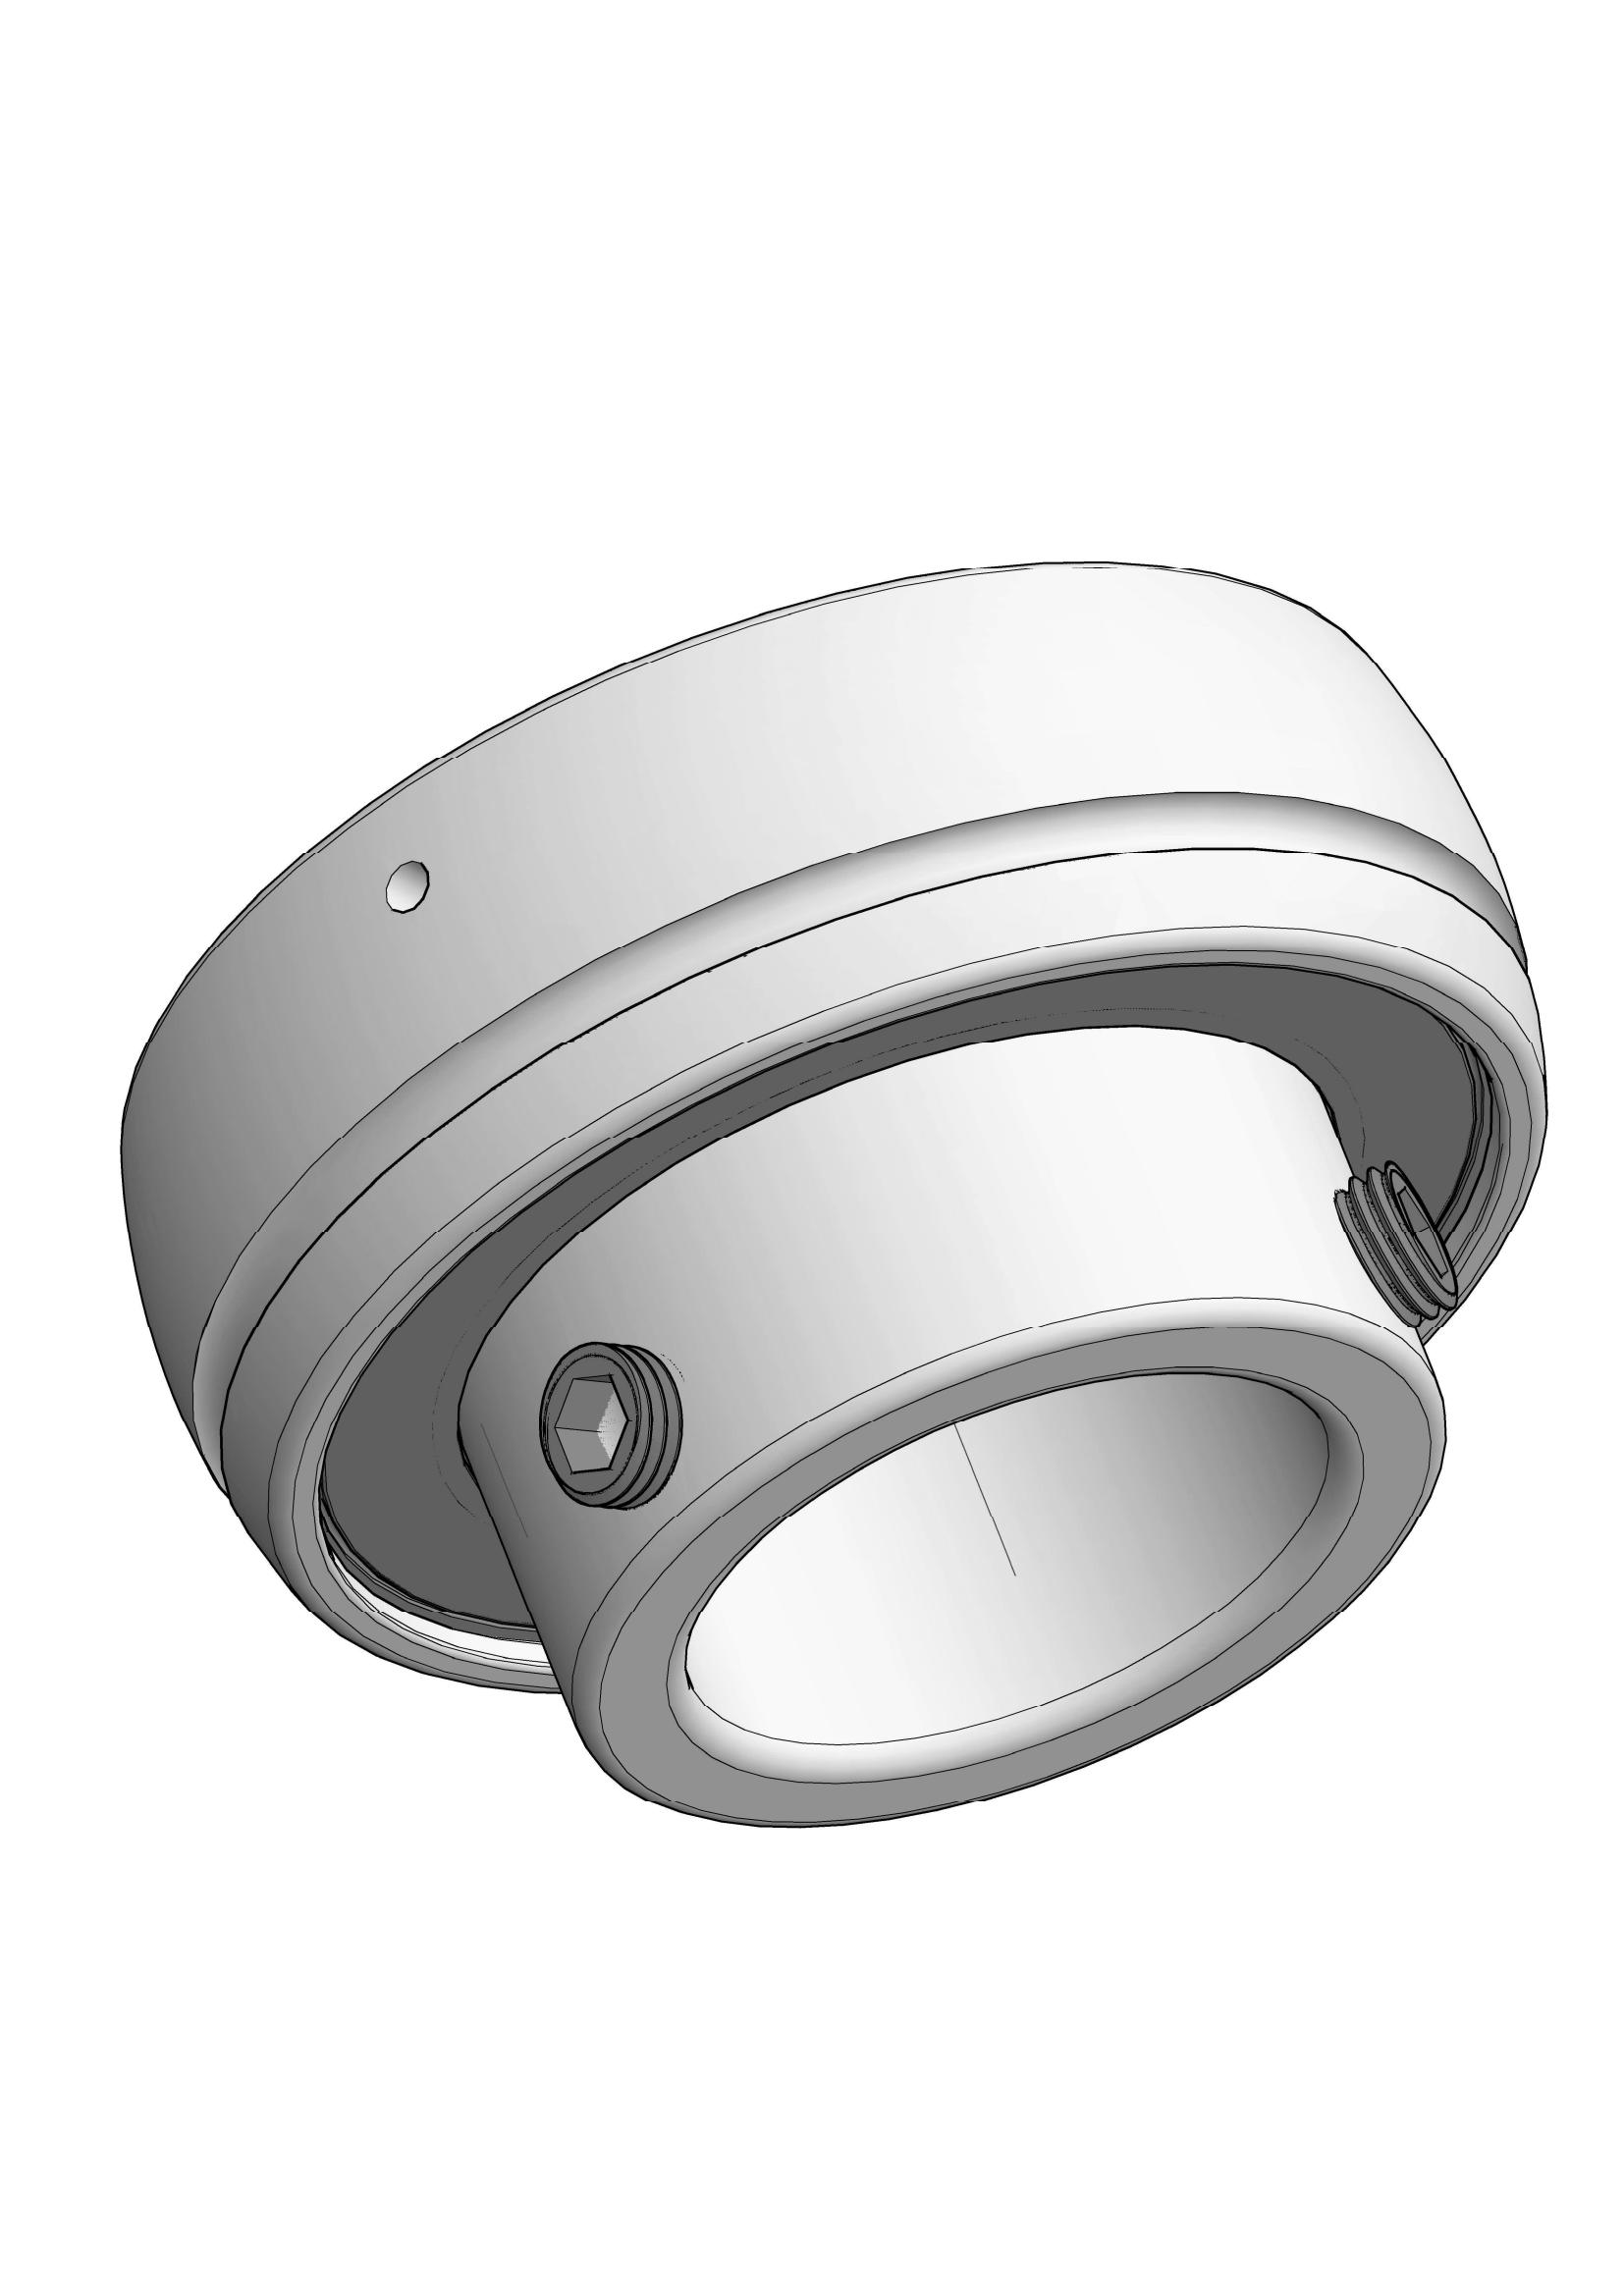 SB209 insert ball bearings with Eccentric Collar Lock with 45mm Bore